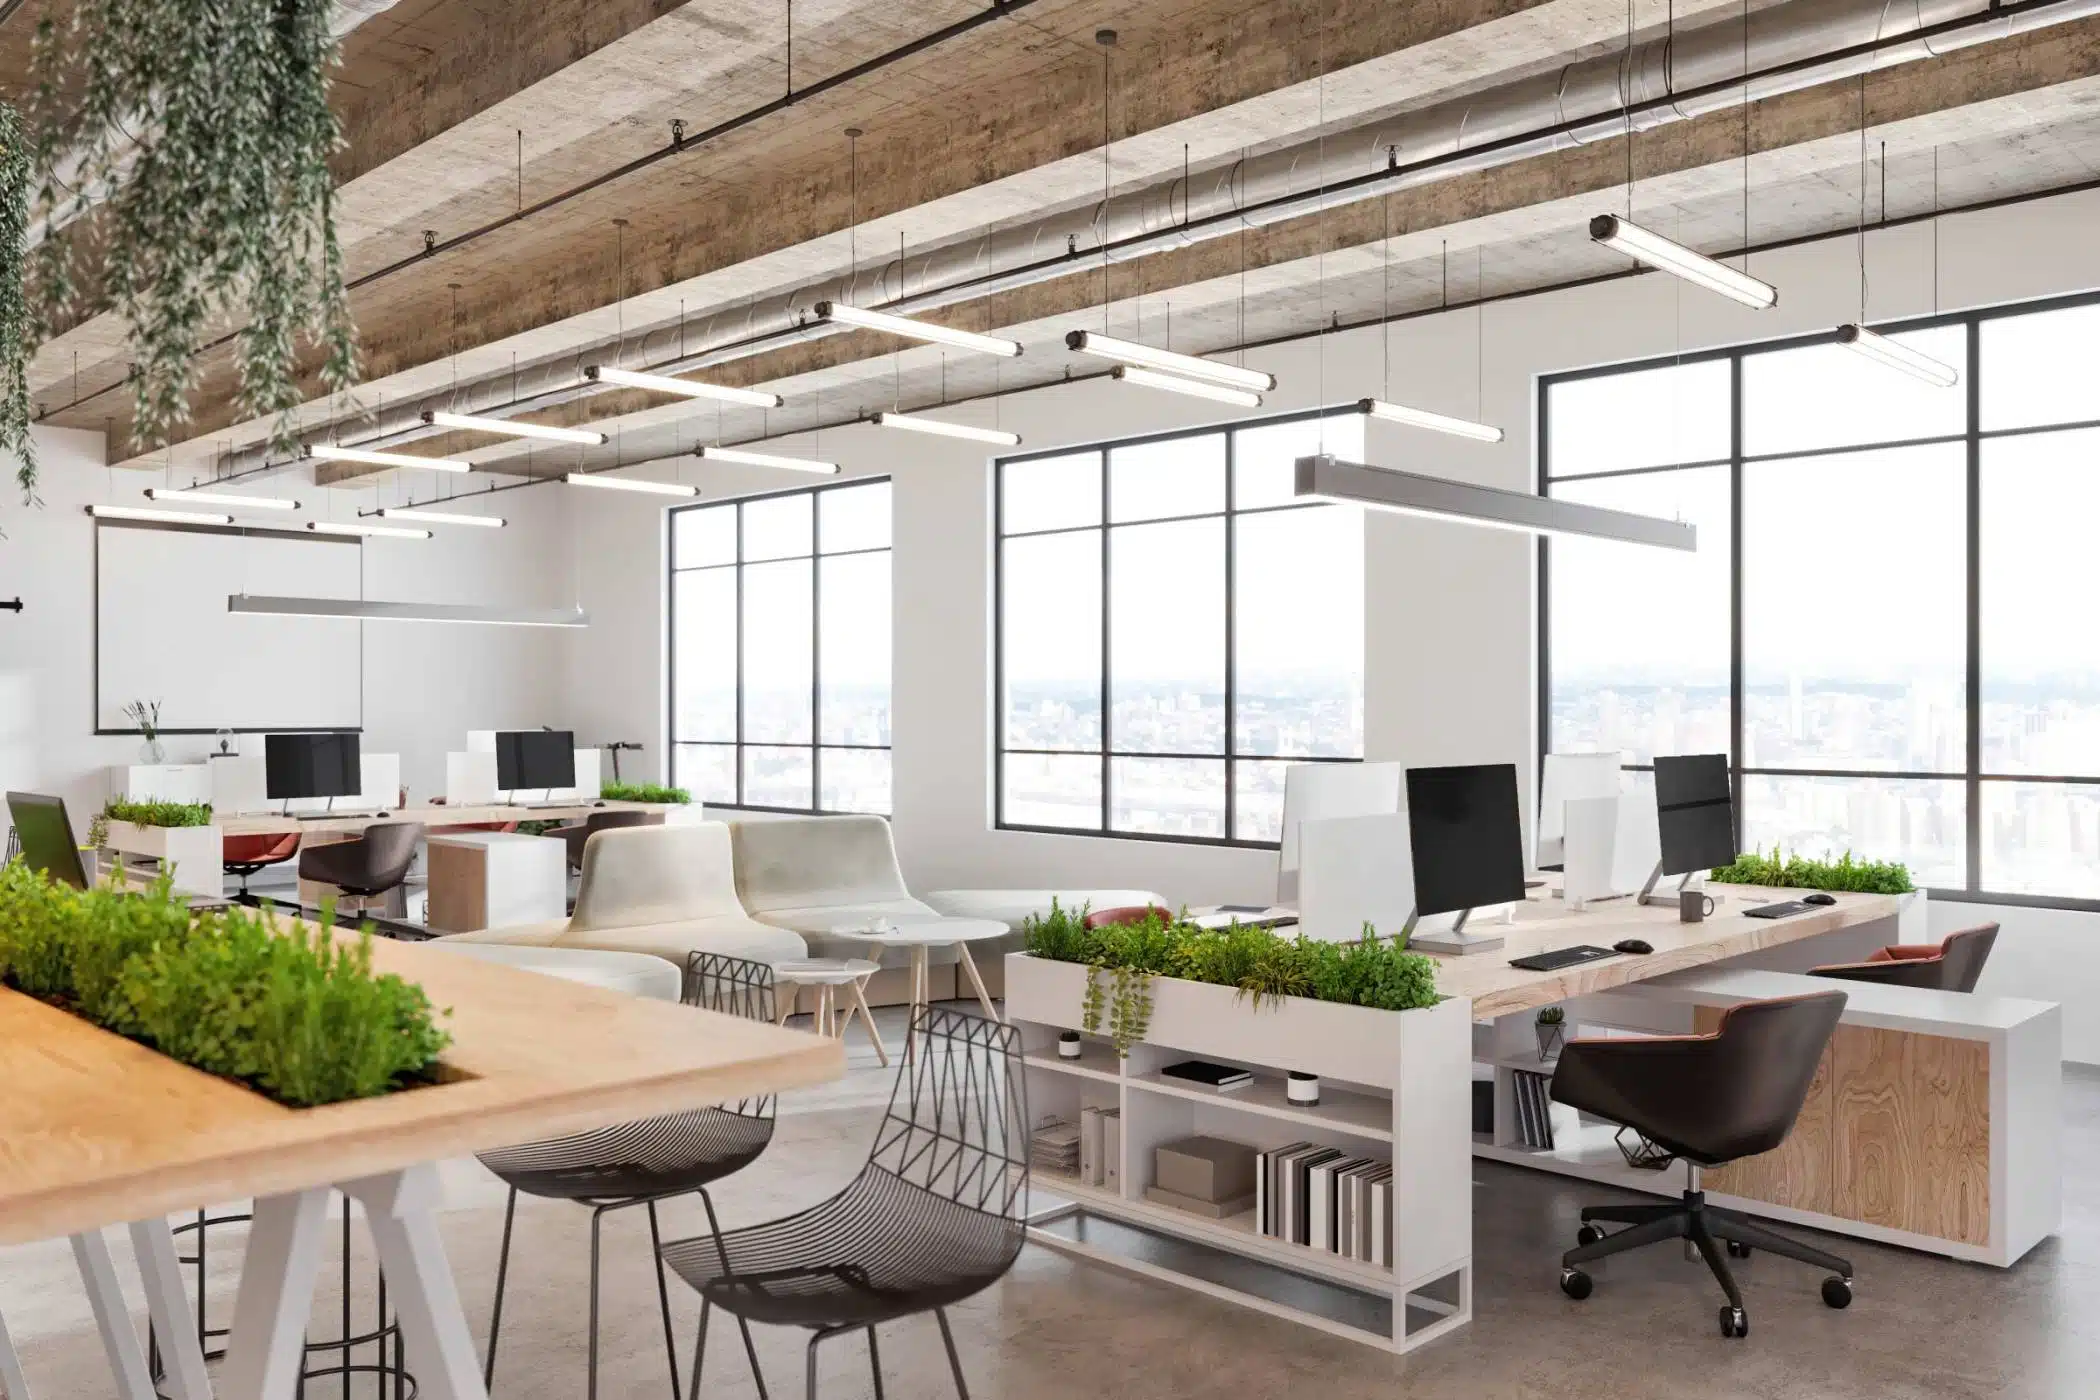 4 Ways To Make Your Office Design More Efficient | Timber Rock Construction